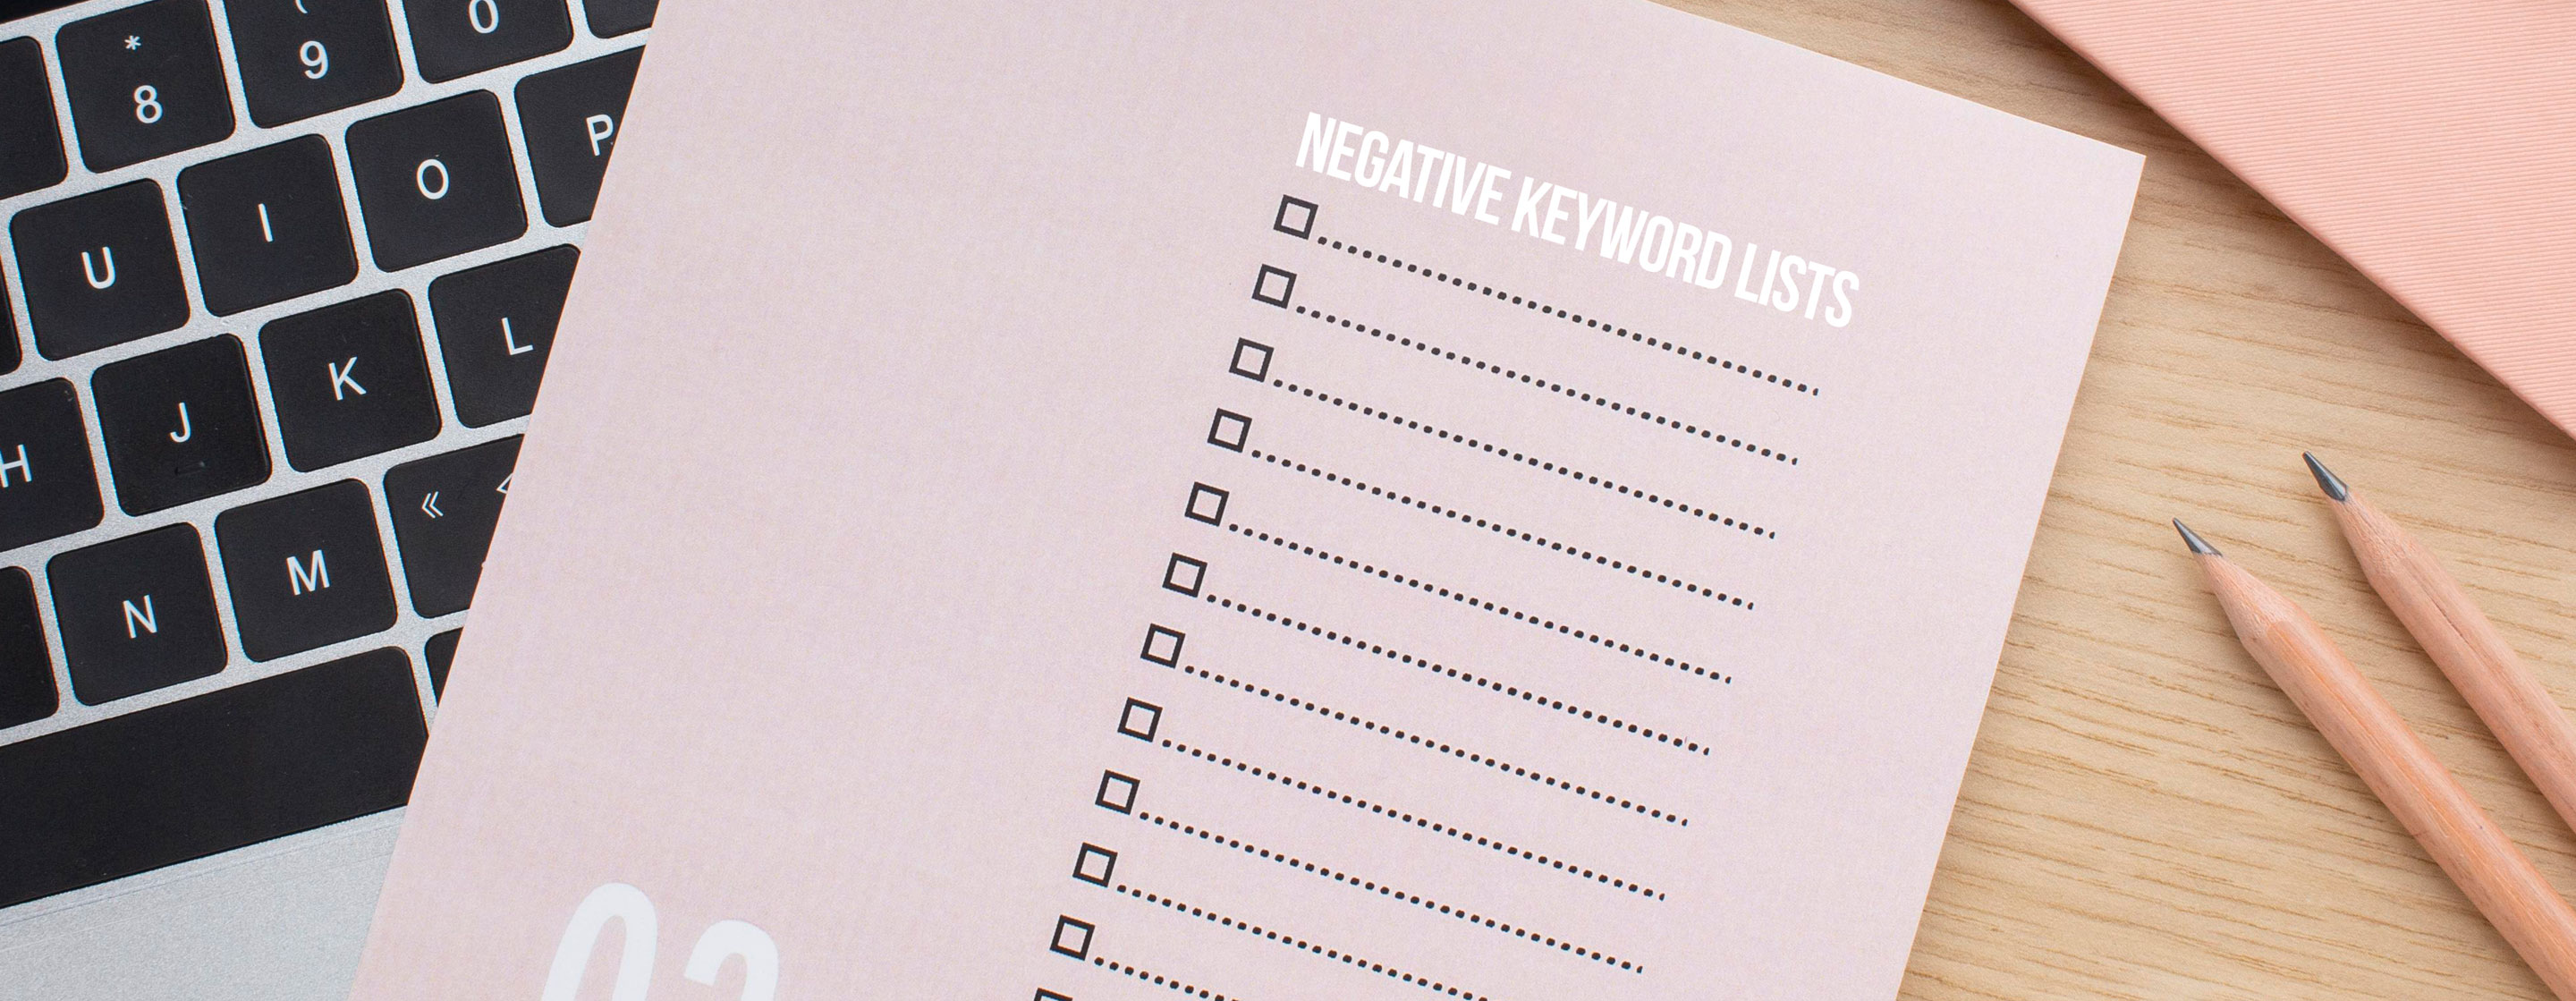 Filter Out Negative Keywords to Improve Performance of Your PPC Campaigns